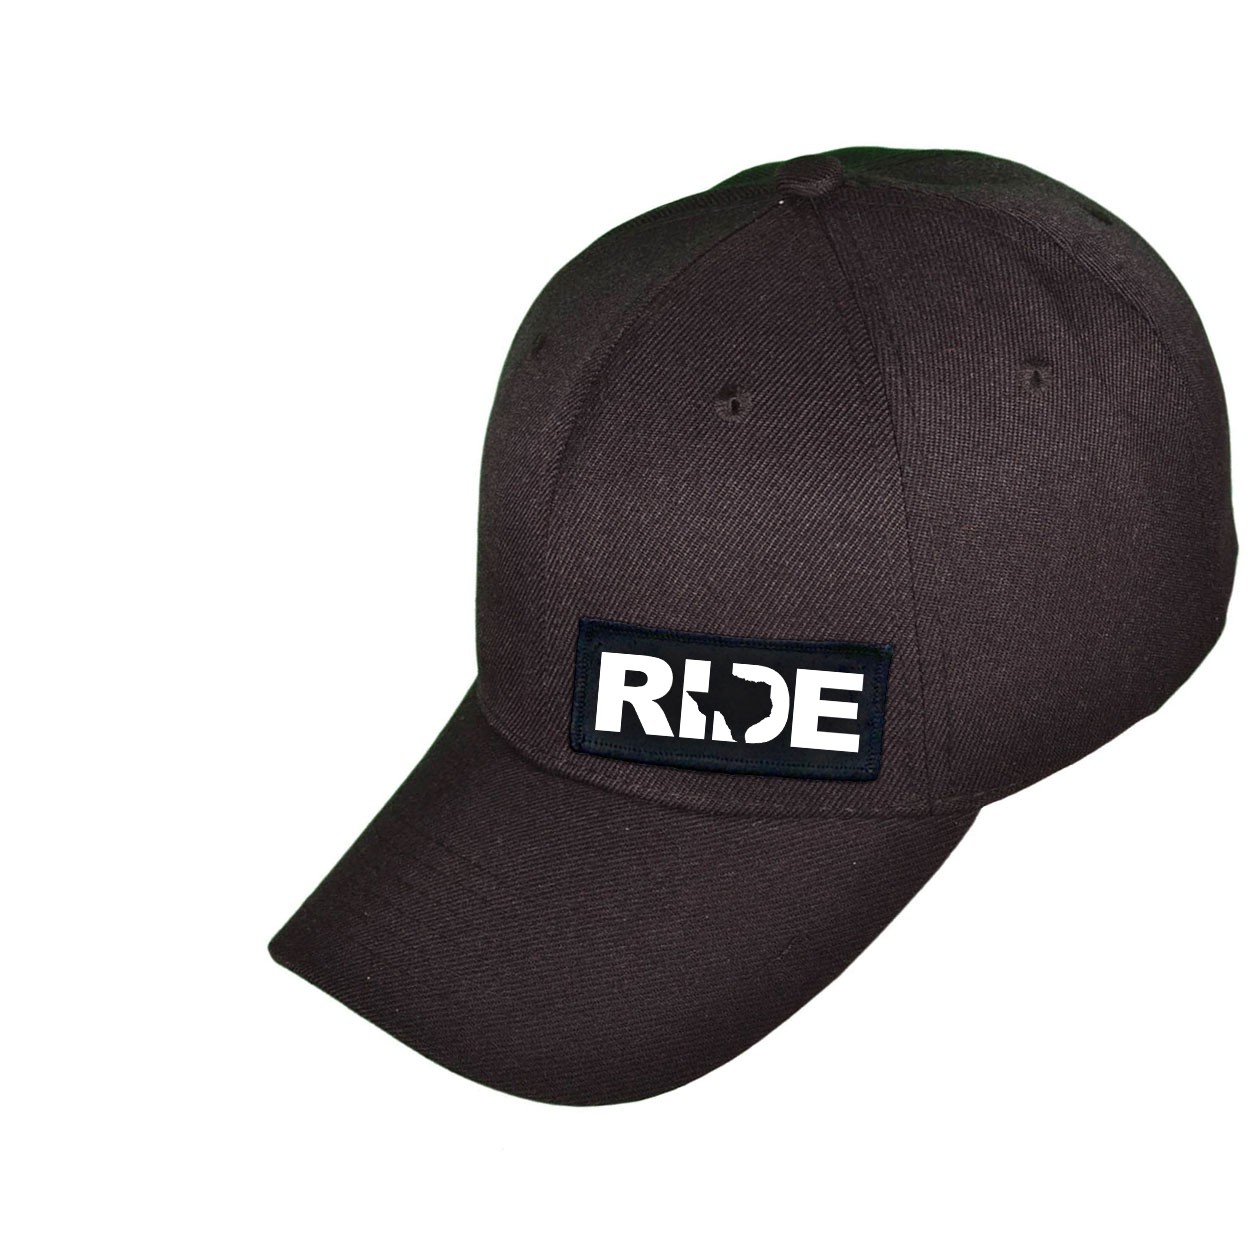 Ride Texas Night Out Woven Patch Velcro Trucker Hat Black (White Logo)